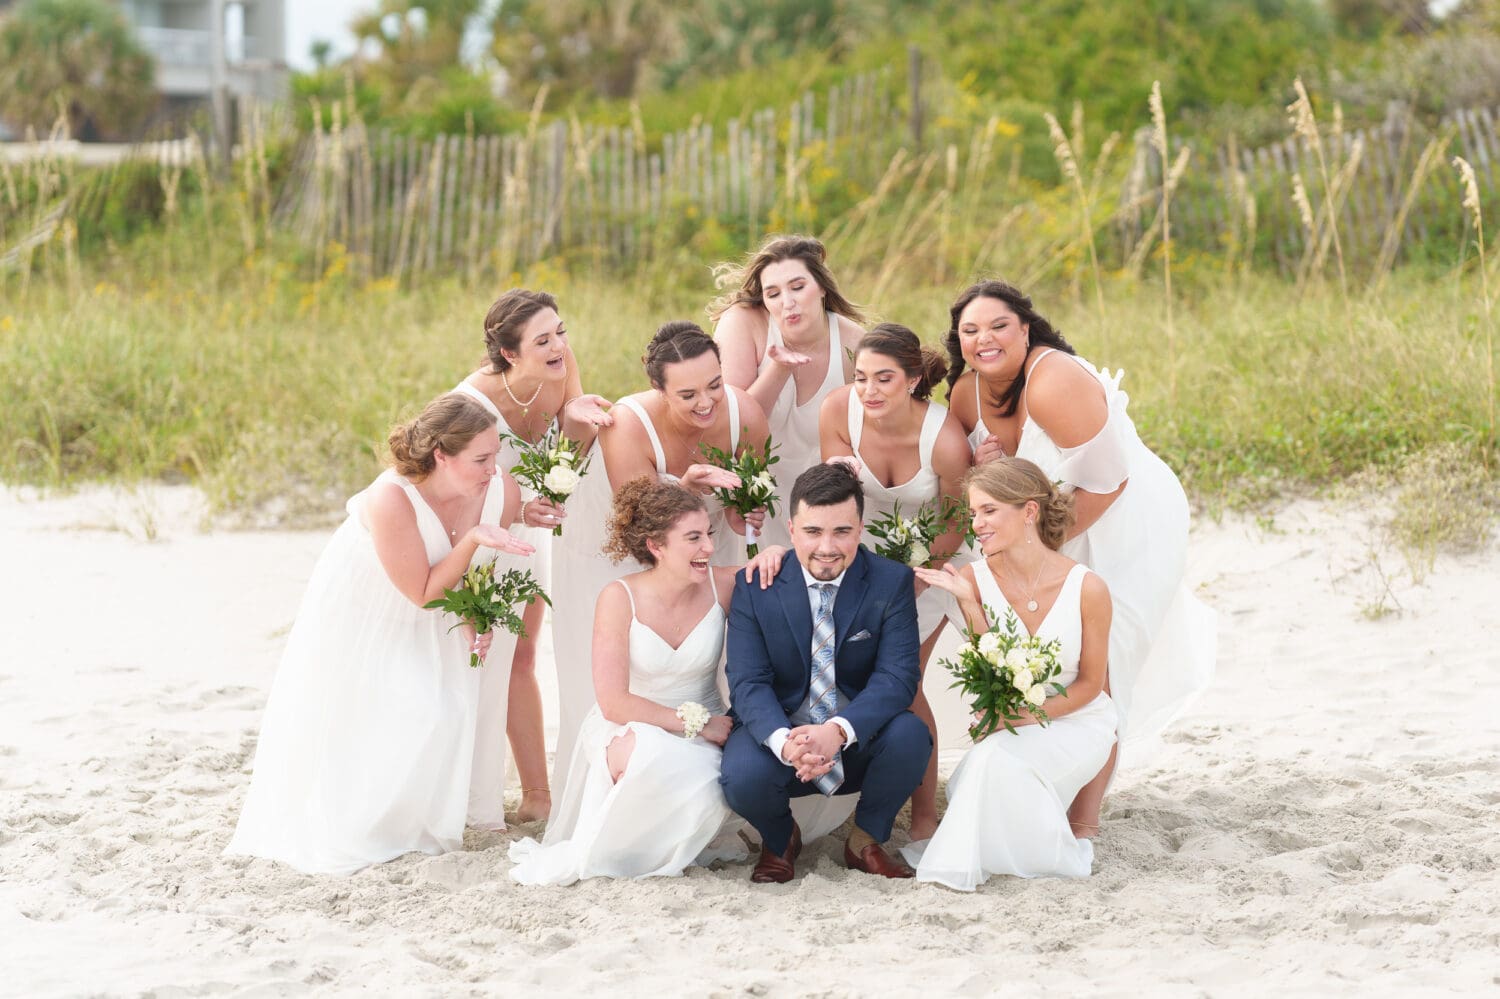 Blowing a kiss to the groom - Hilton Myrtle Beach Resort